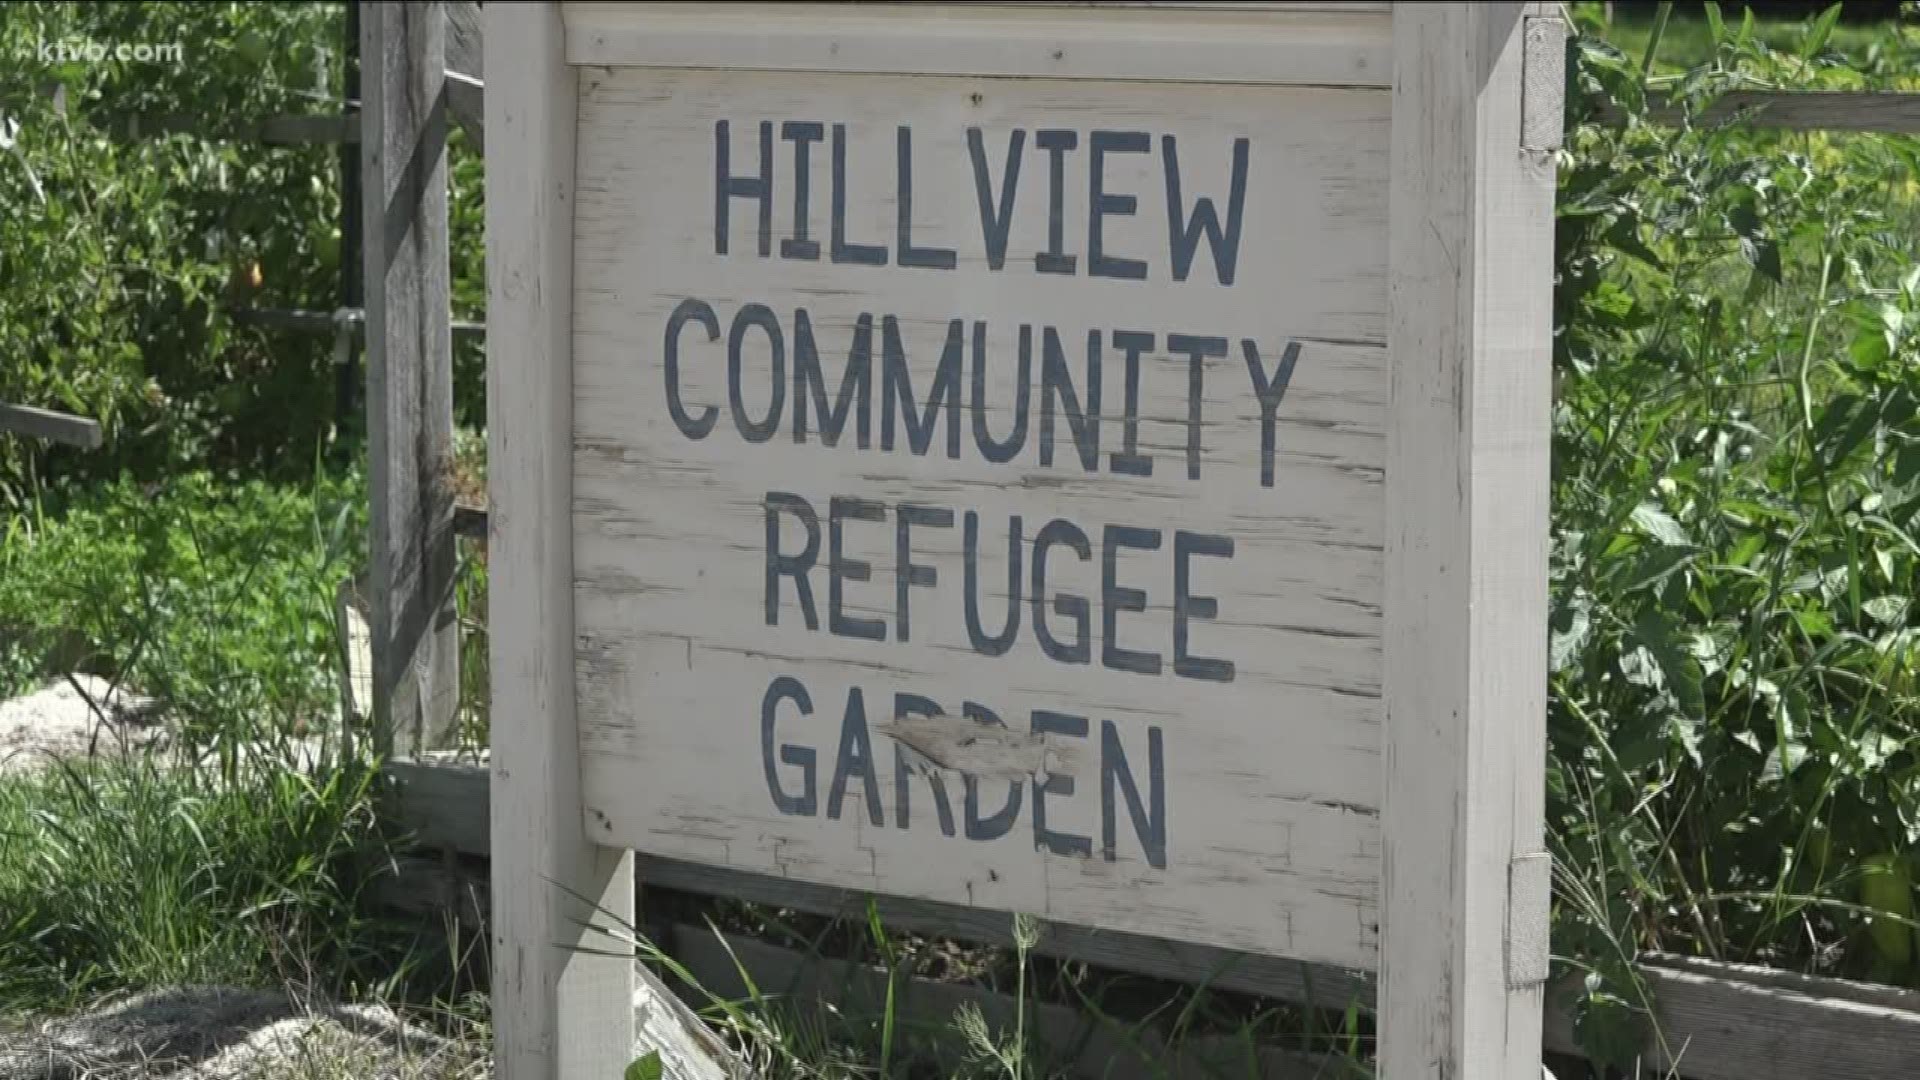 Police are looking for the people who stole vegetables from the community garden.